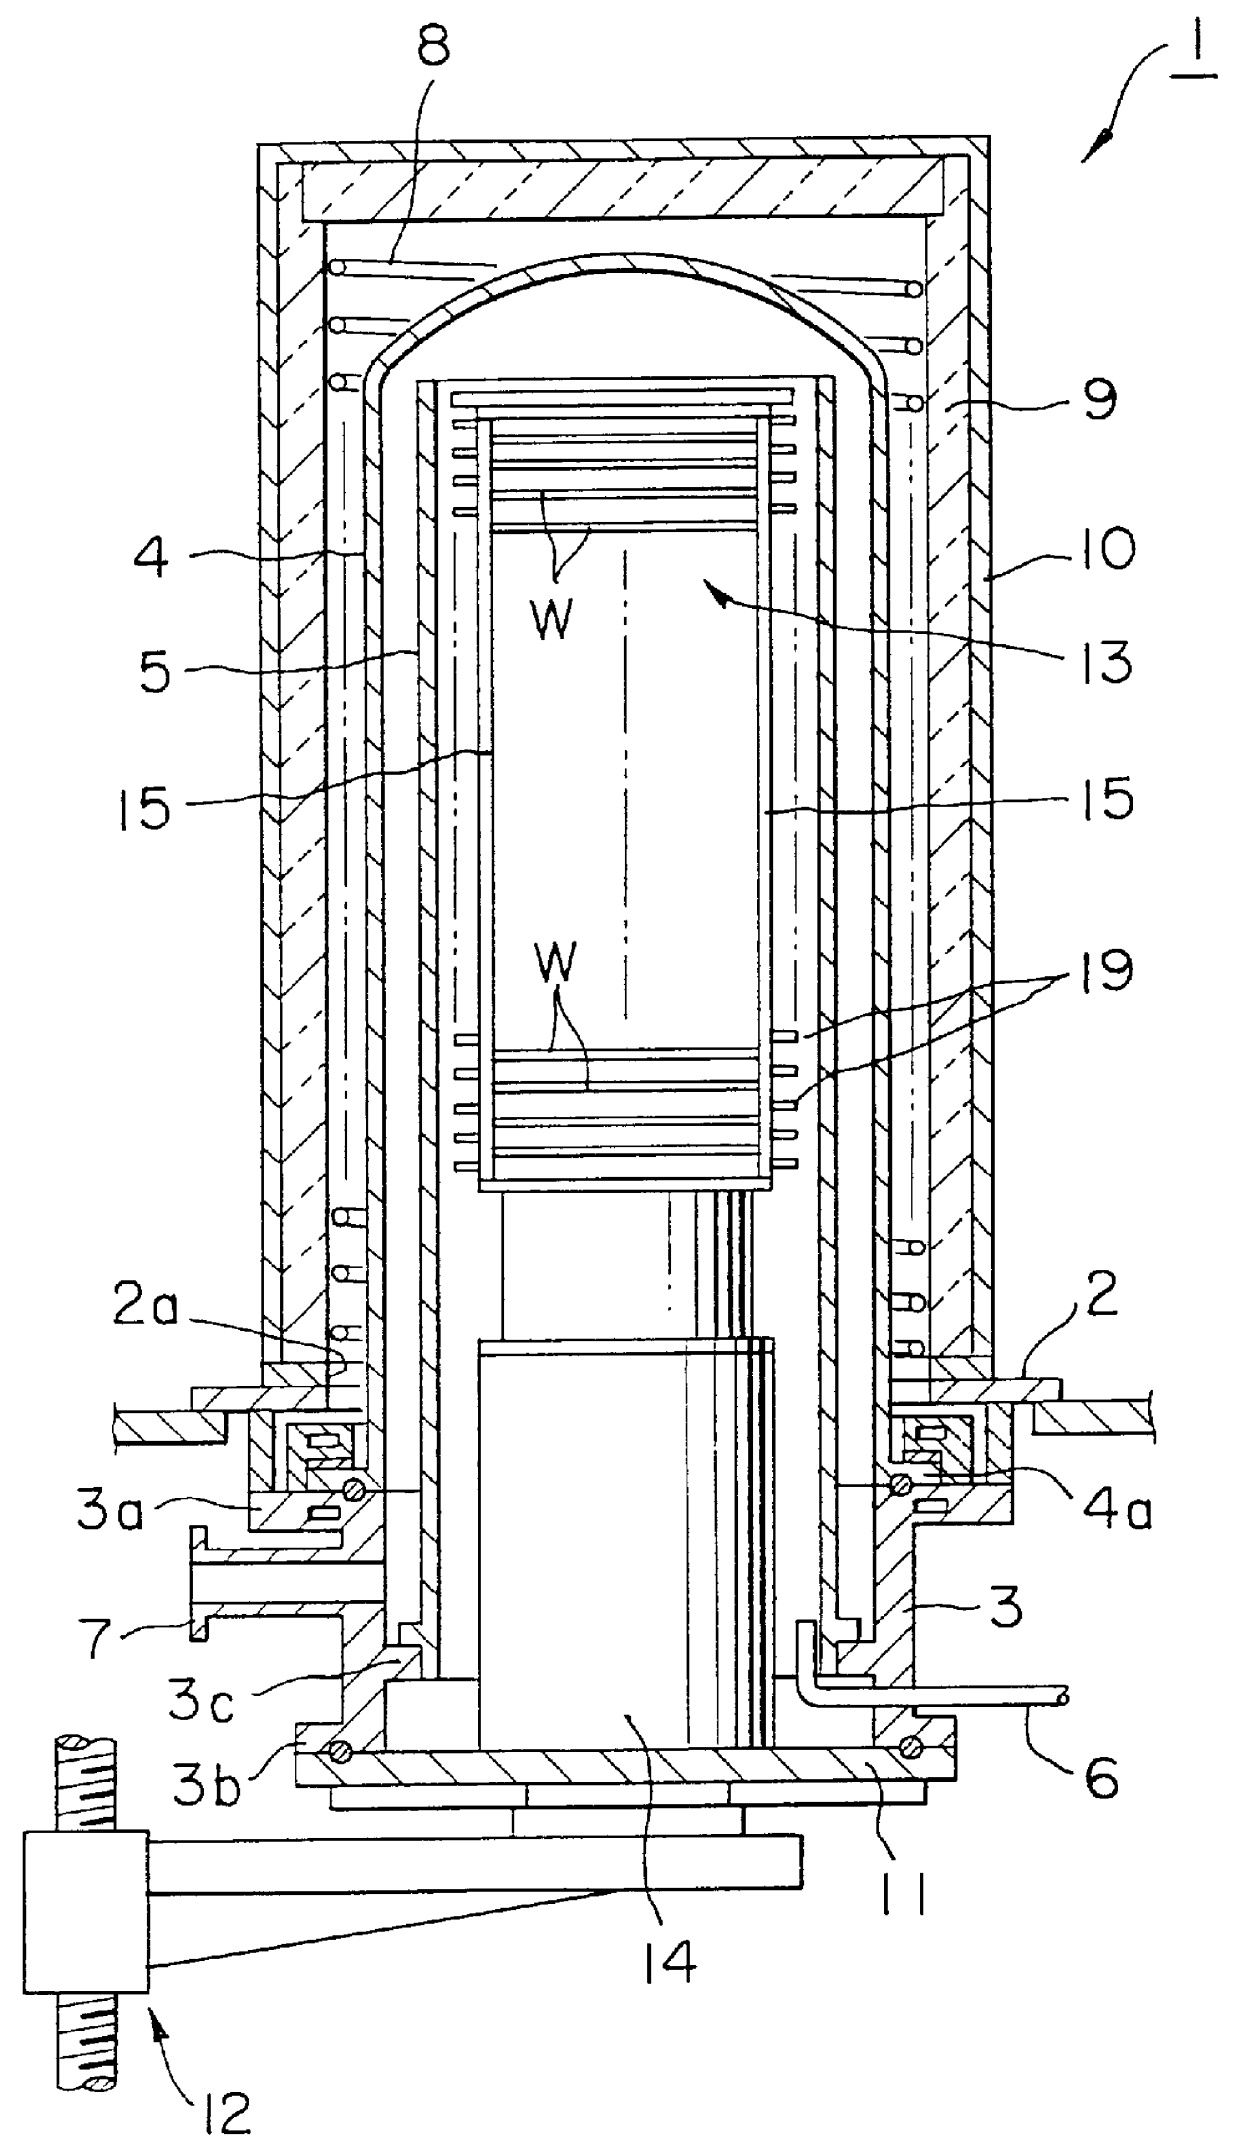 Thermal treatment apparatus with thermal protection members intercepting thermal radiation at or above a predetermined angle